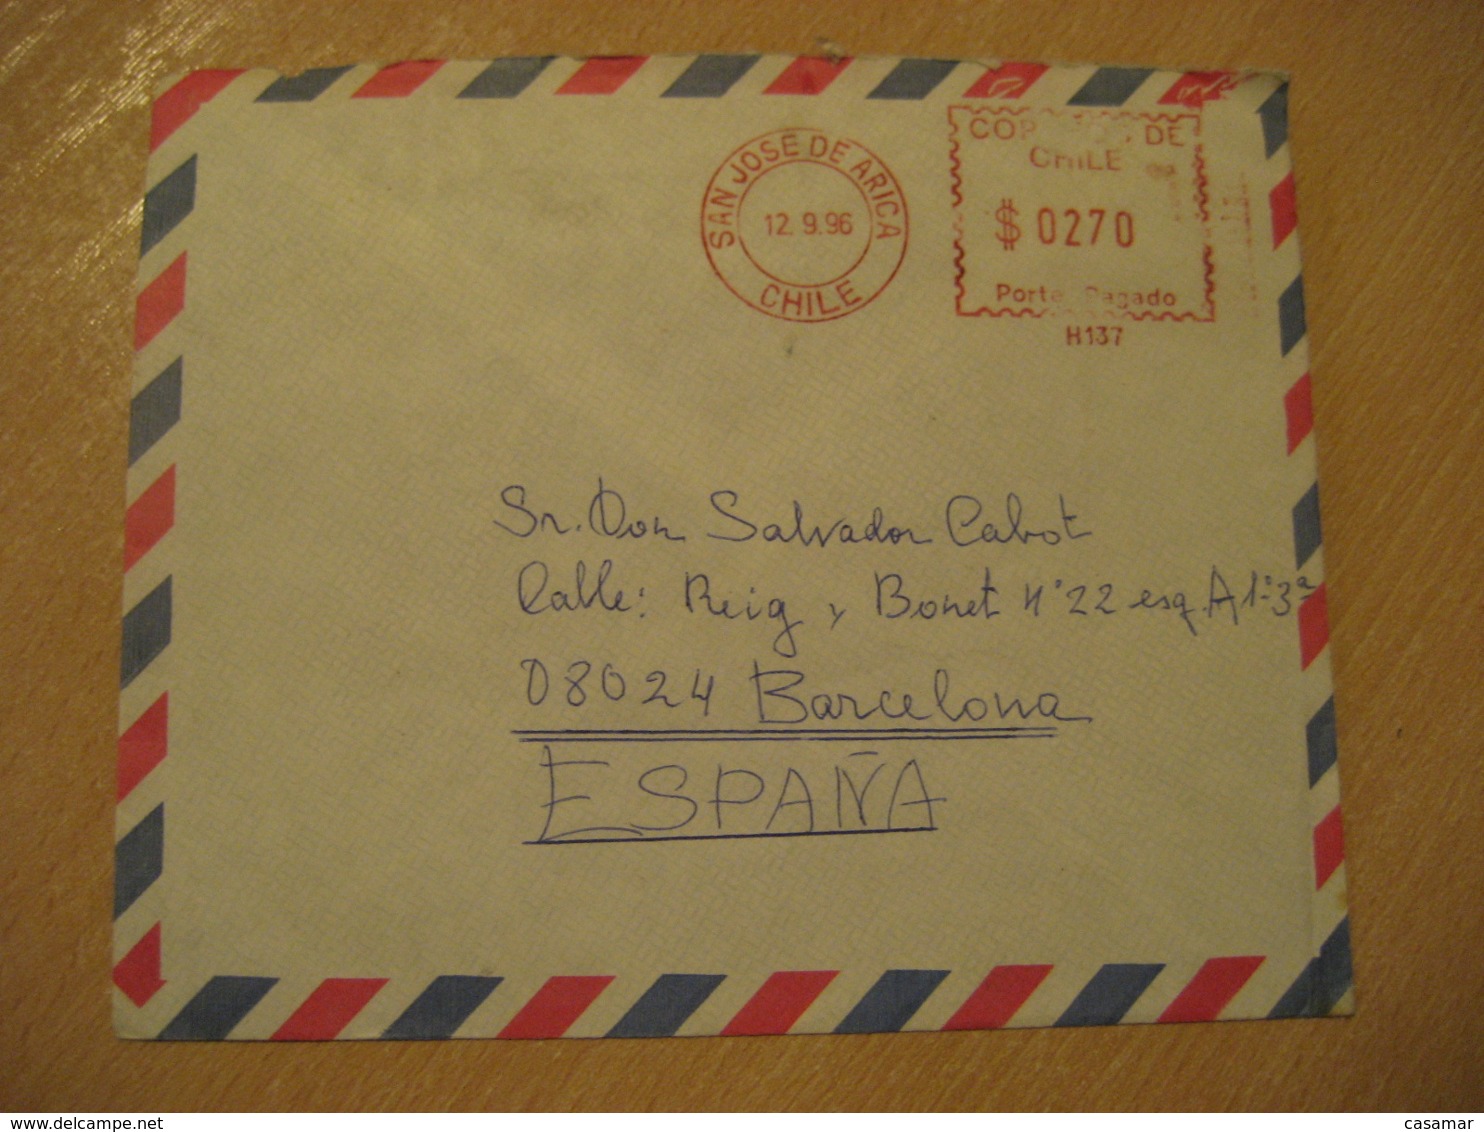 SAN JOSE DE ARICA 1996 To Barcelona Spain Cancel Meter Air Mail Cover CHILE - Chili